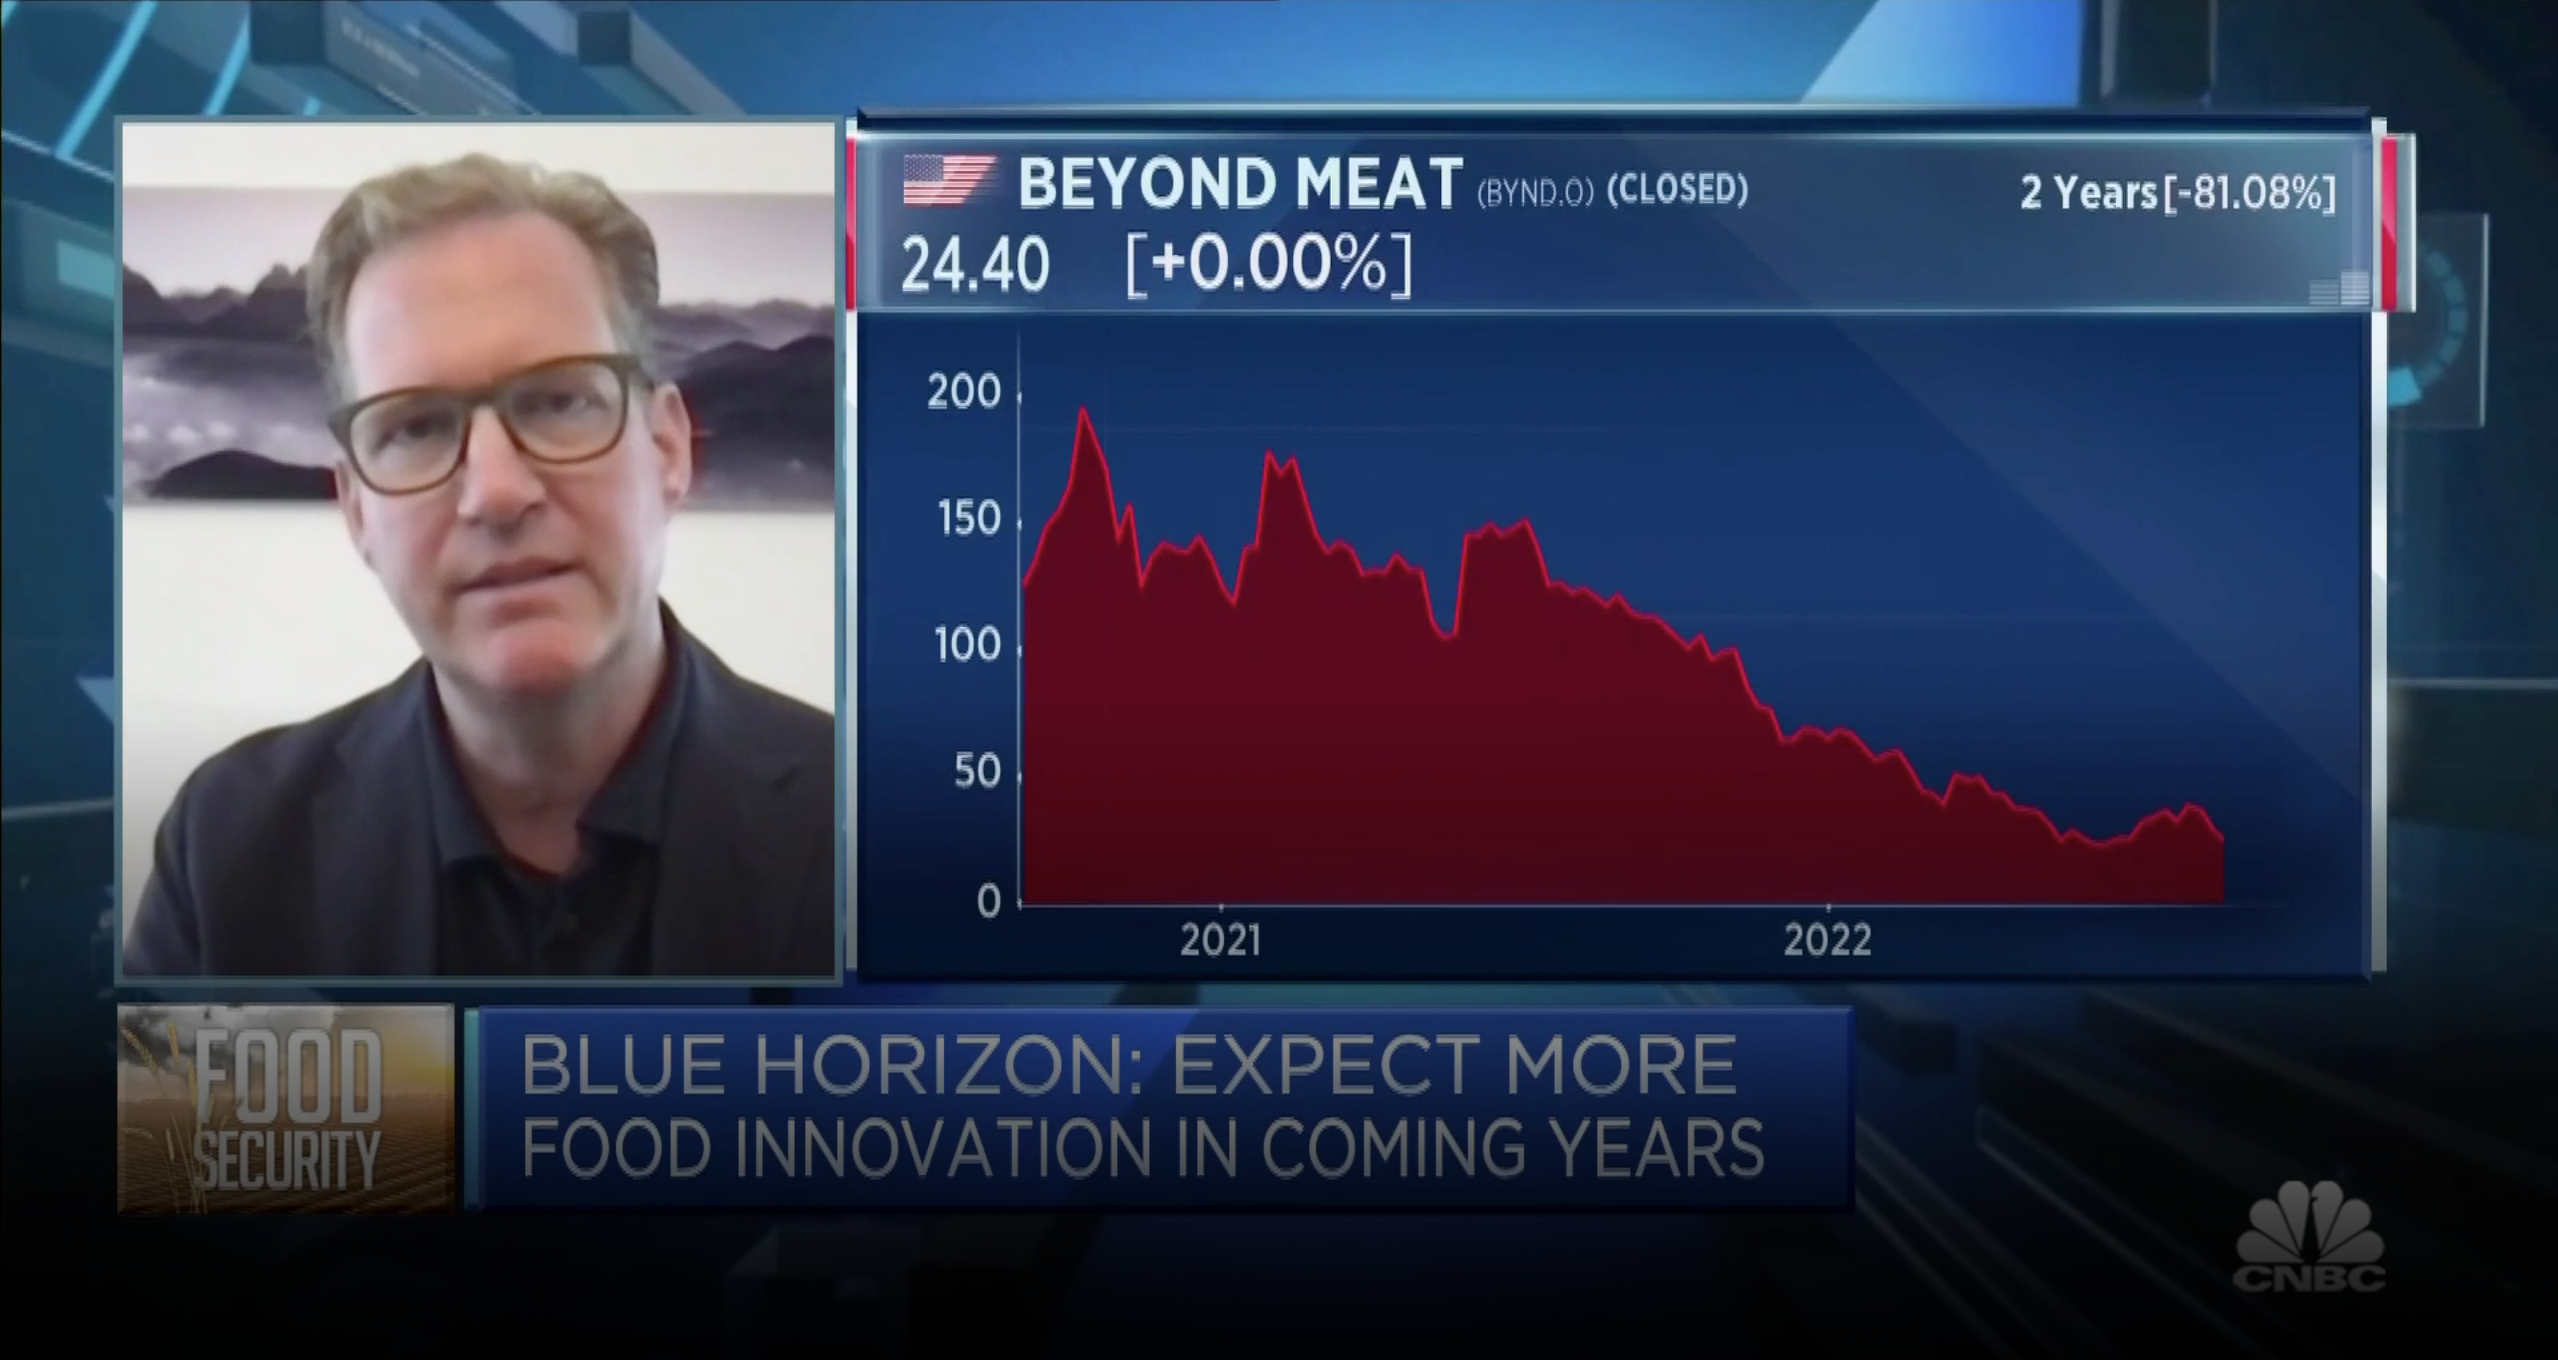 Blue Horizon: Expect ‘strong’ adoption curve of plant-based meat in fast food chains